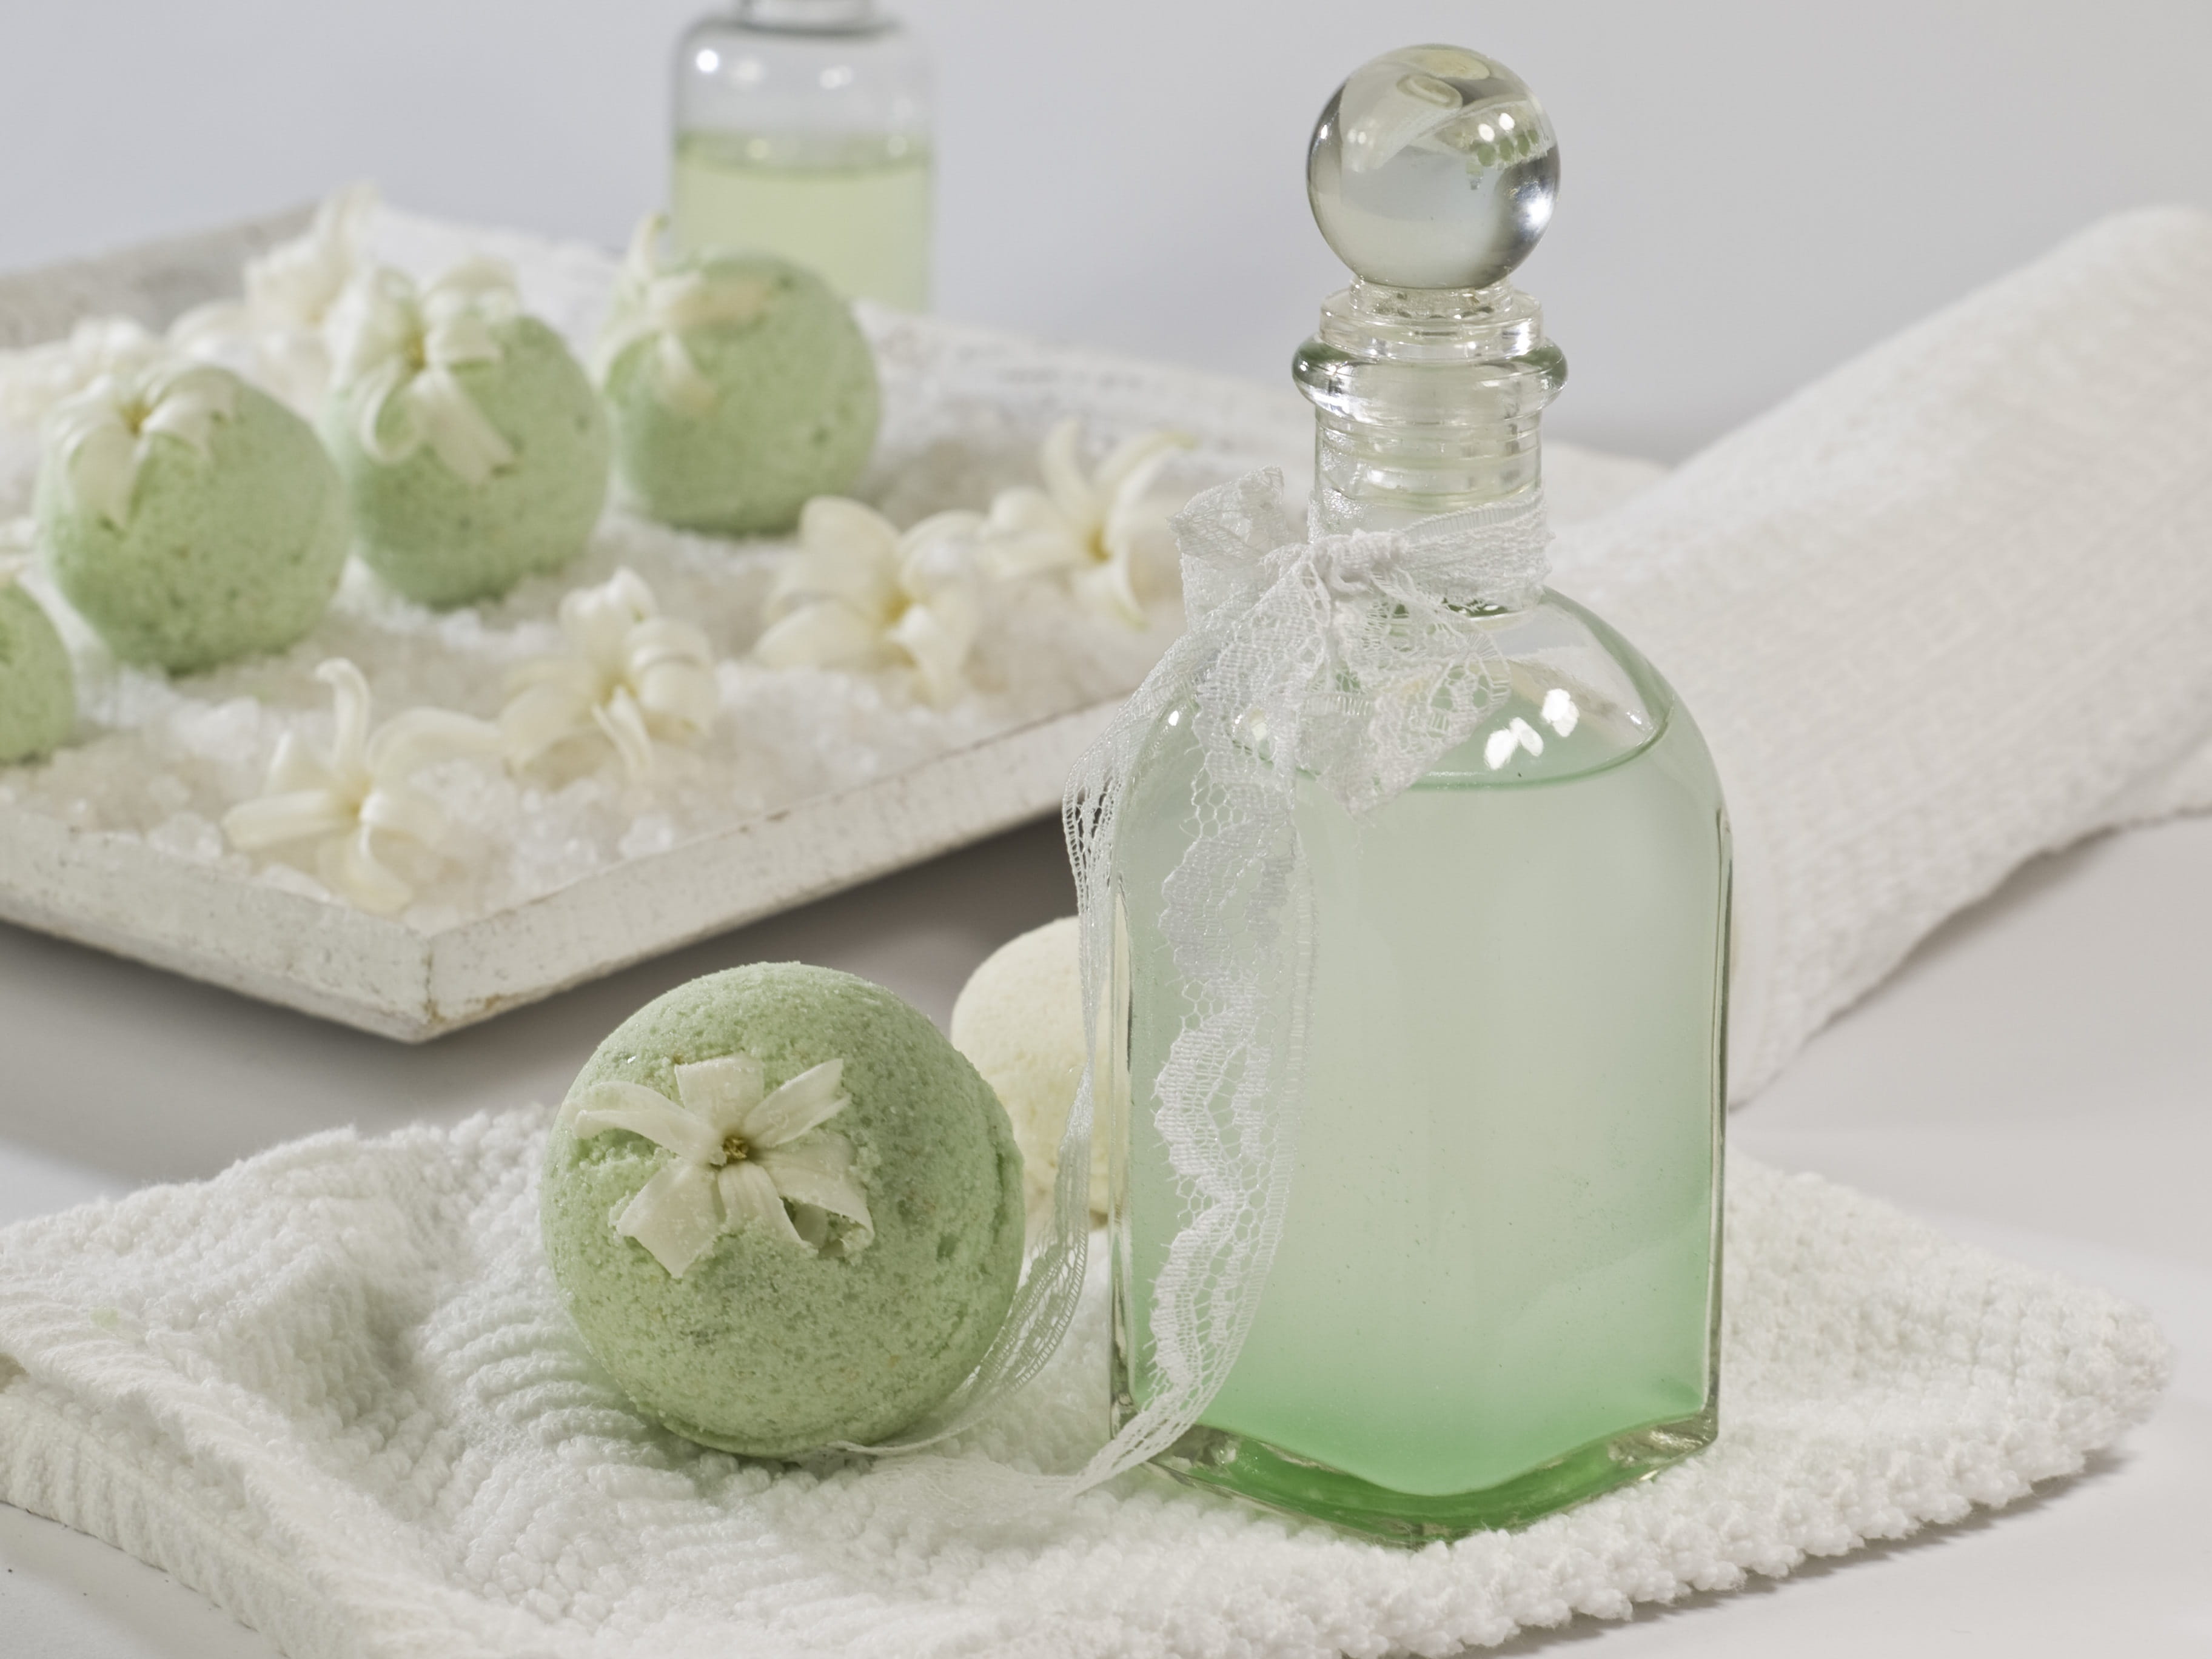 clear glass bottle beside green cake pops placed on white knitted textile